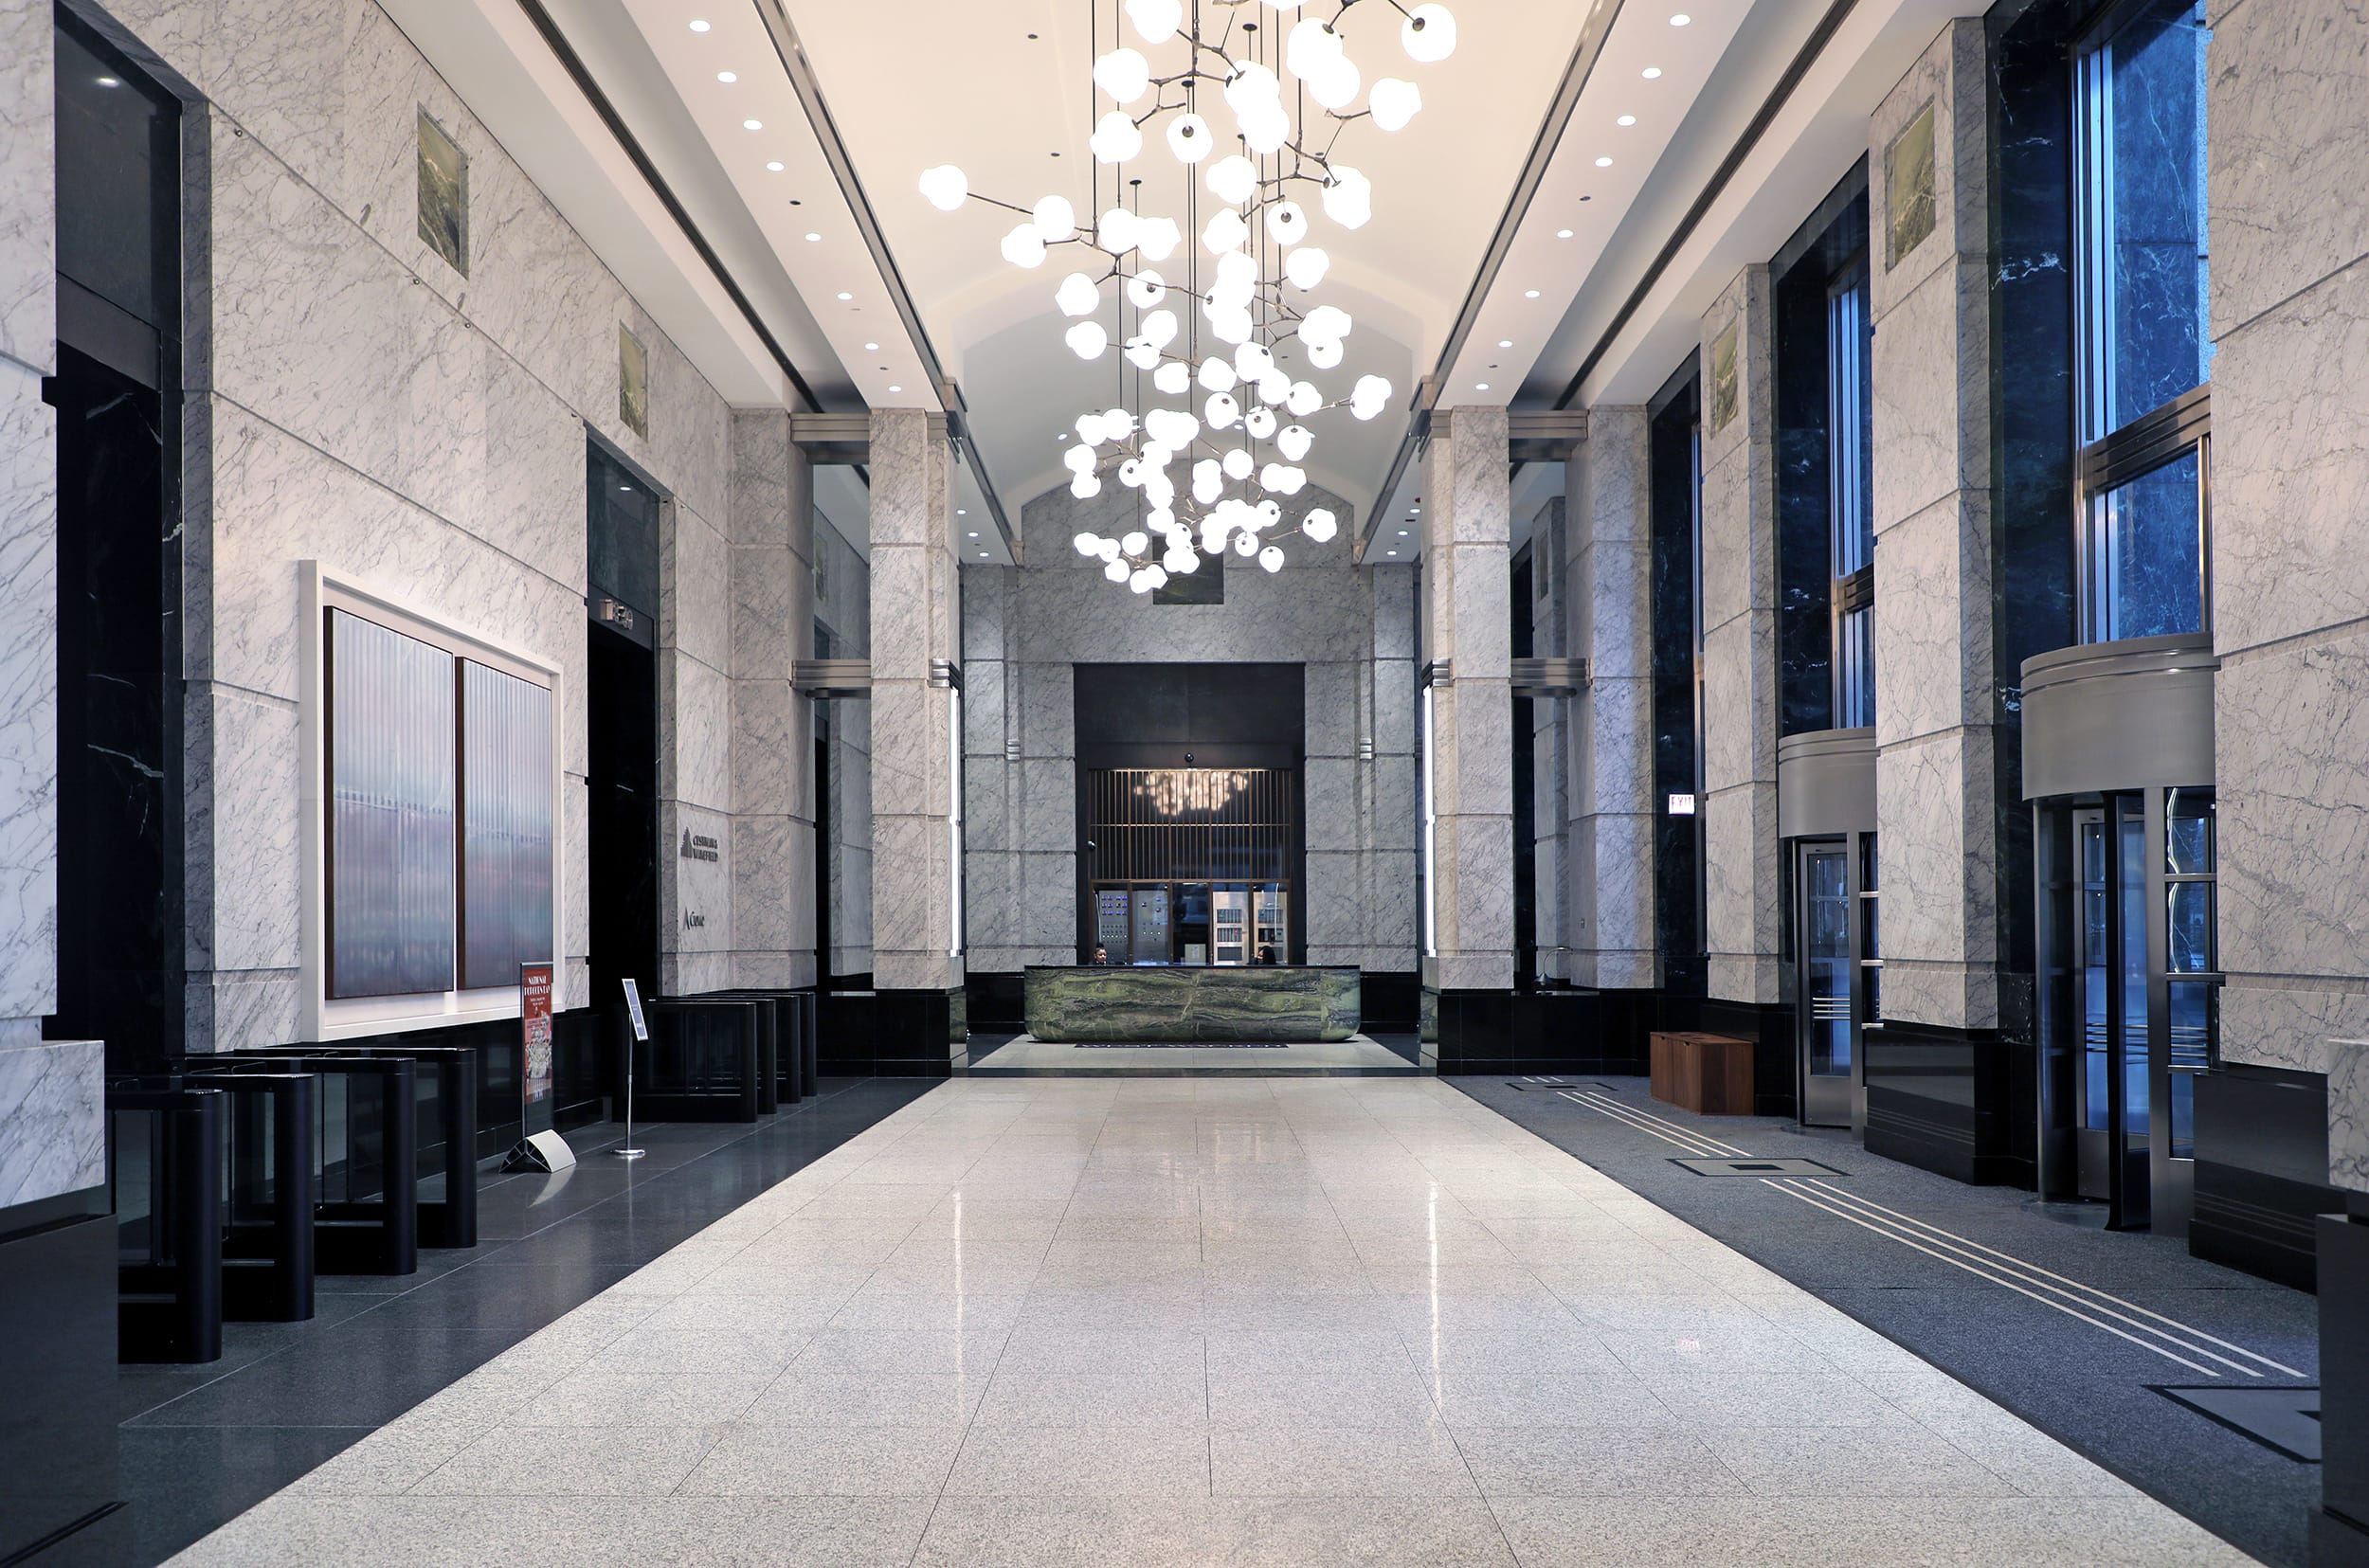 Skender Completes Complex Landlord Construction Project at 225 W. Wacker Drive